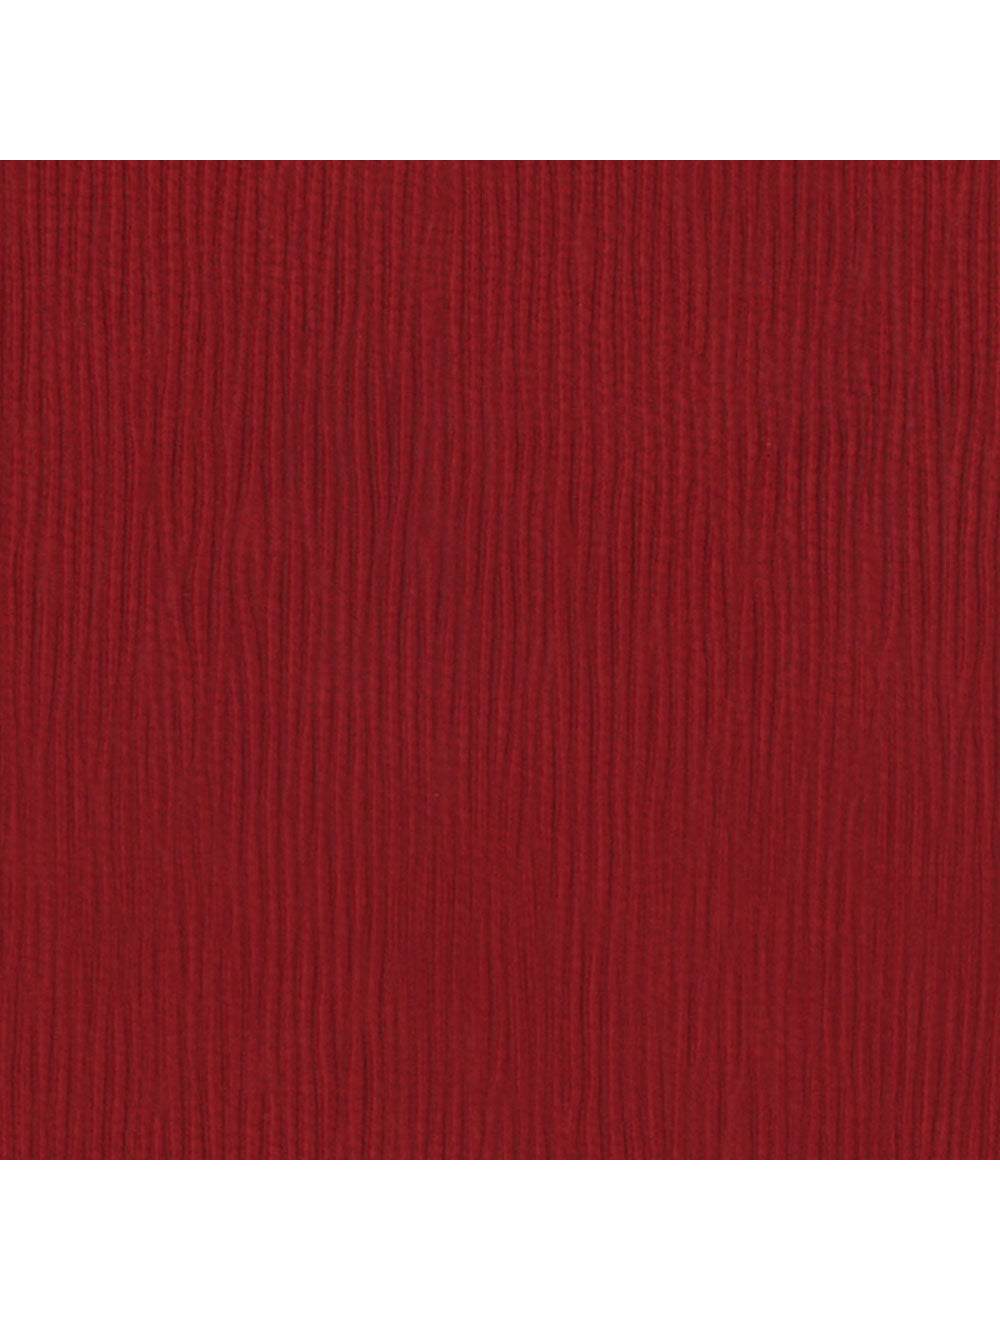 Paris Ruby Red Material Swatch